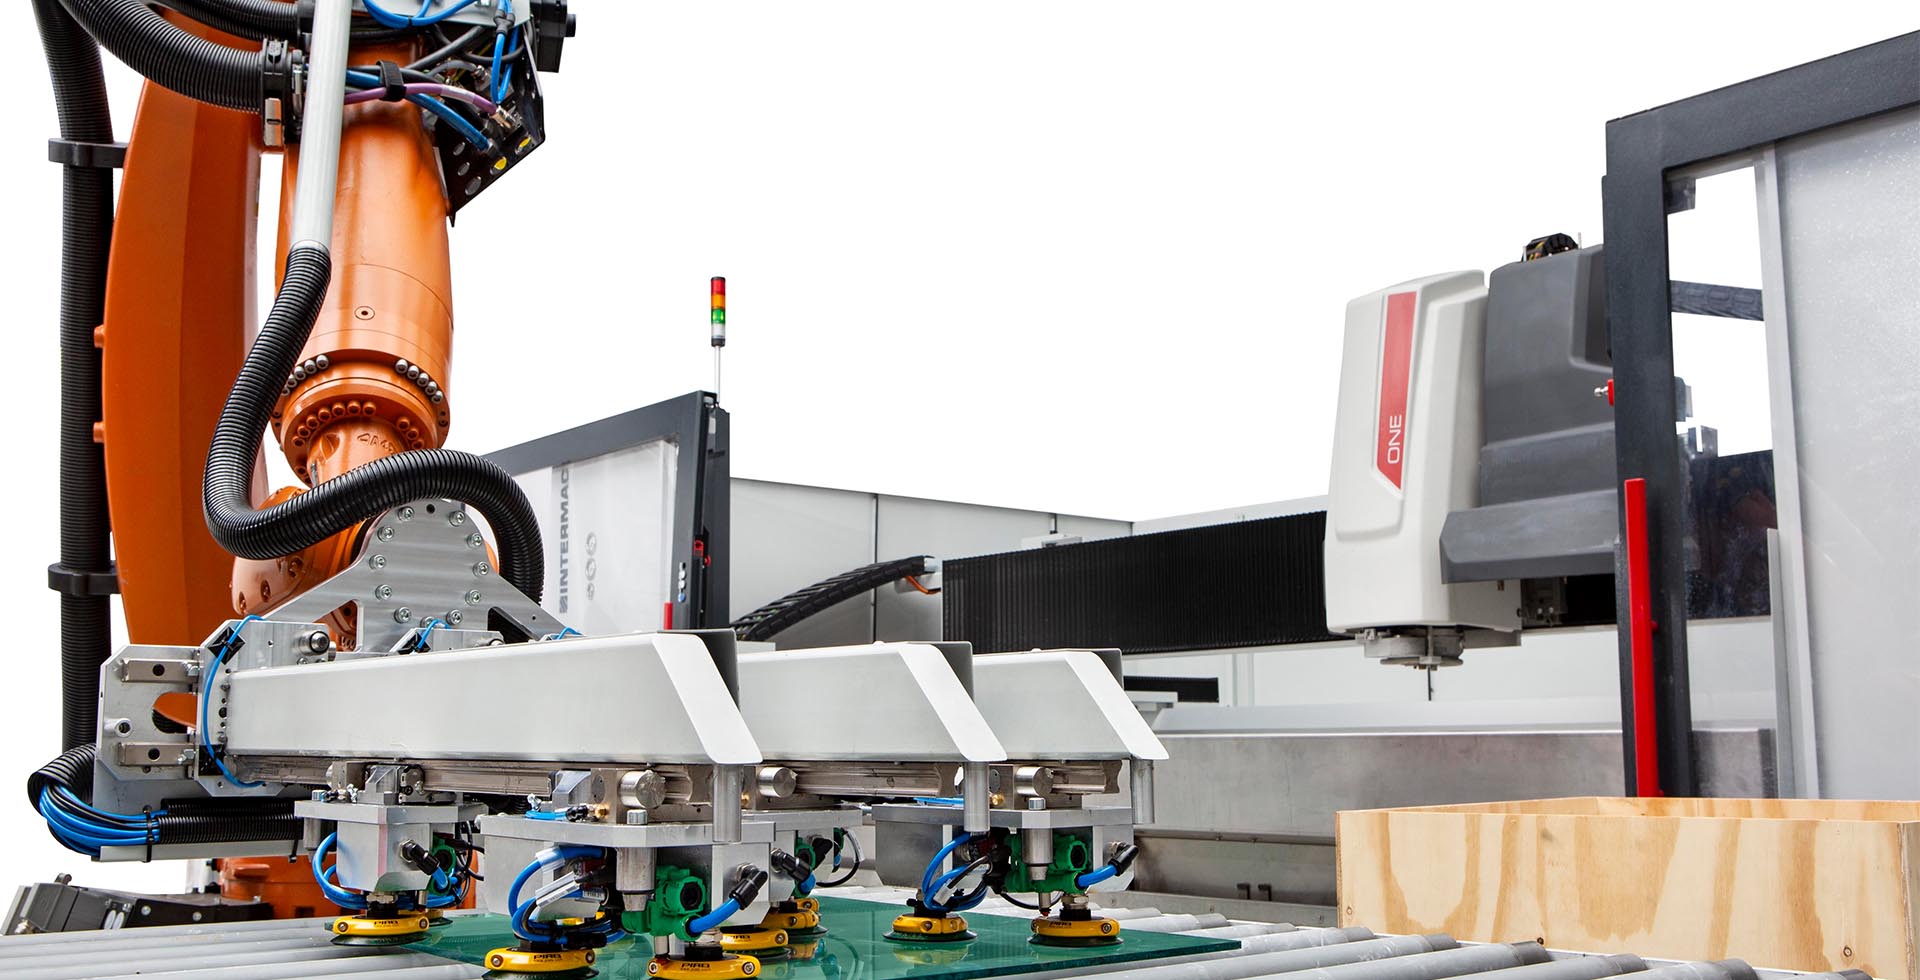 CNC Automaction puts industry 4.0 within reach